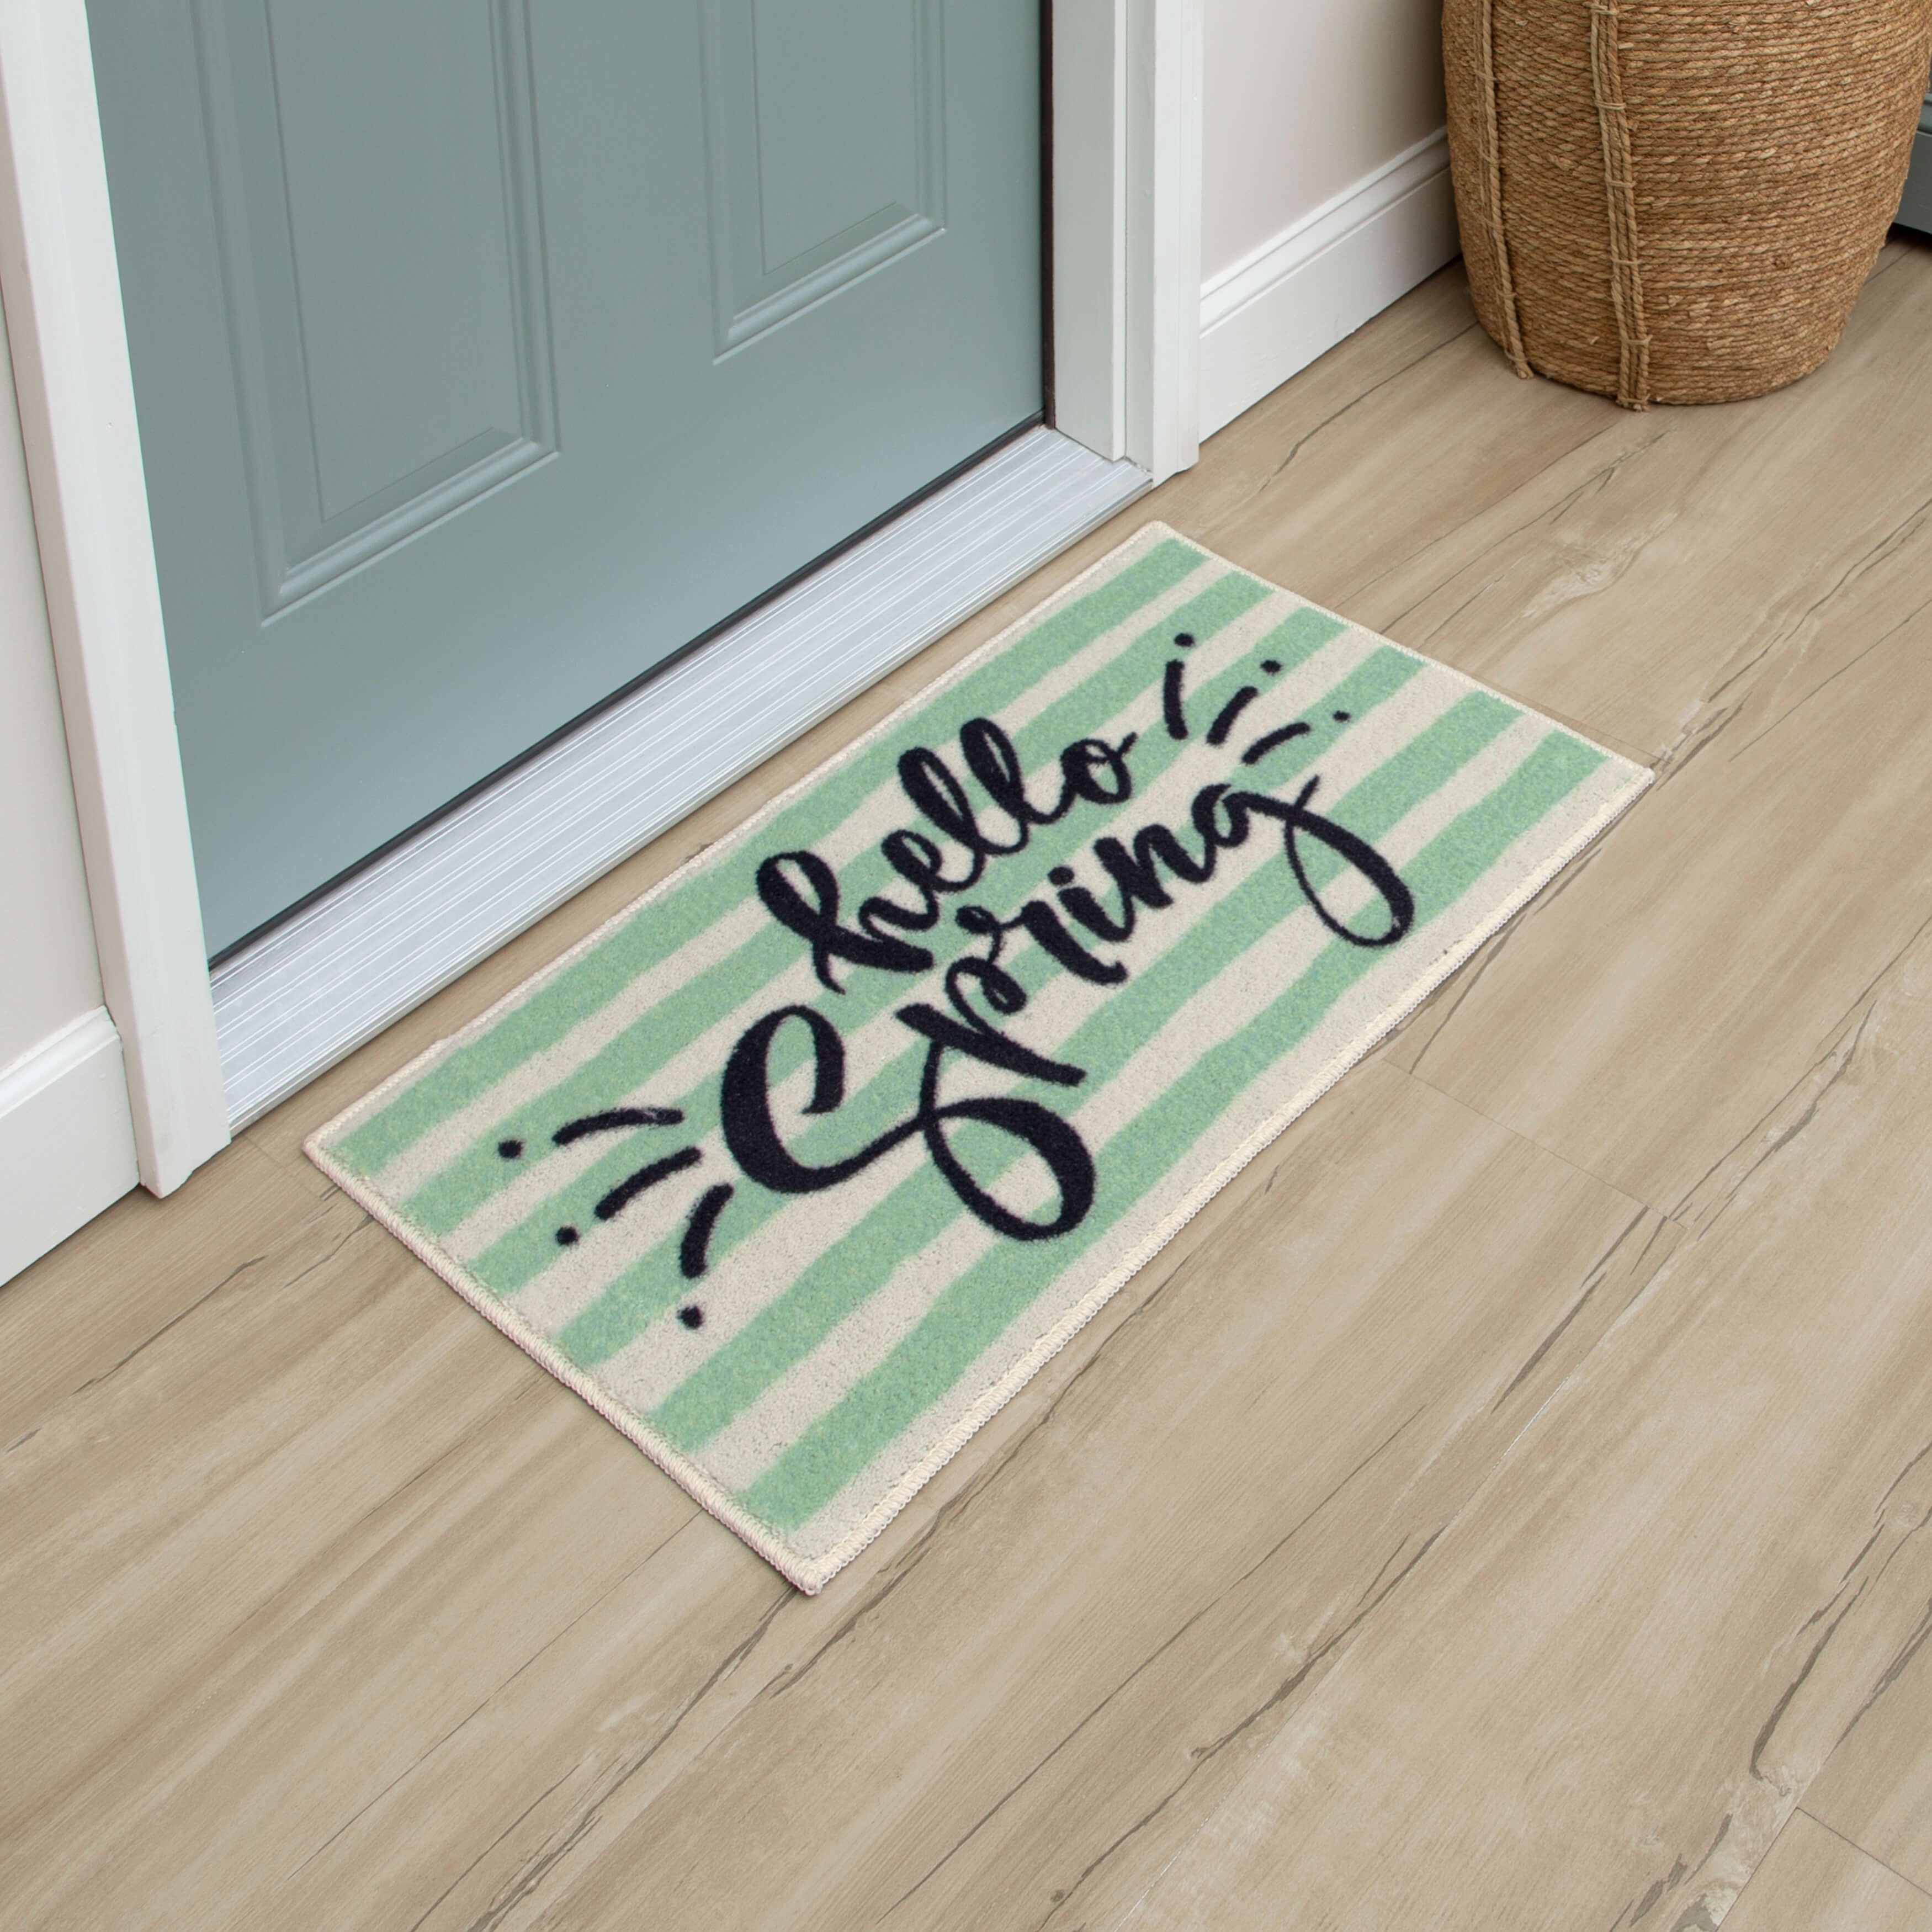 https://ak1.ostkcdn.com/images/products/is/images/direct/011ce35a7cf6bb2c569464de1bae2575c0474adb/Mohawk-Home-Striped-Spring-Kitchen-Mat-Scatter-Accent-Rug.jpg